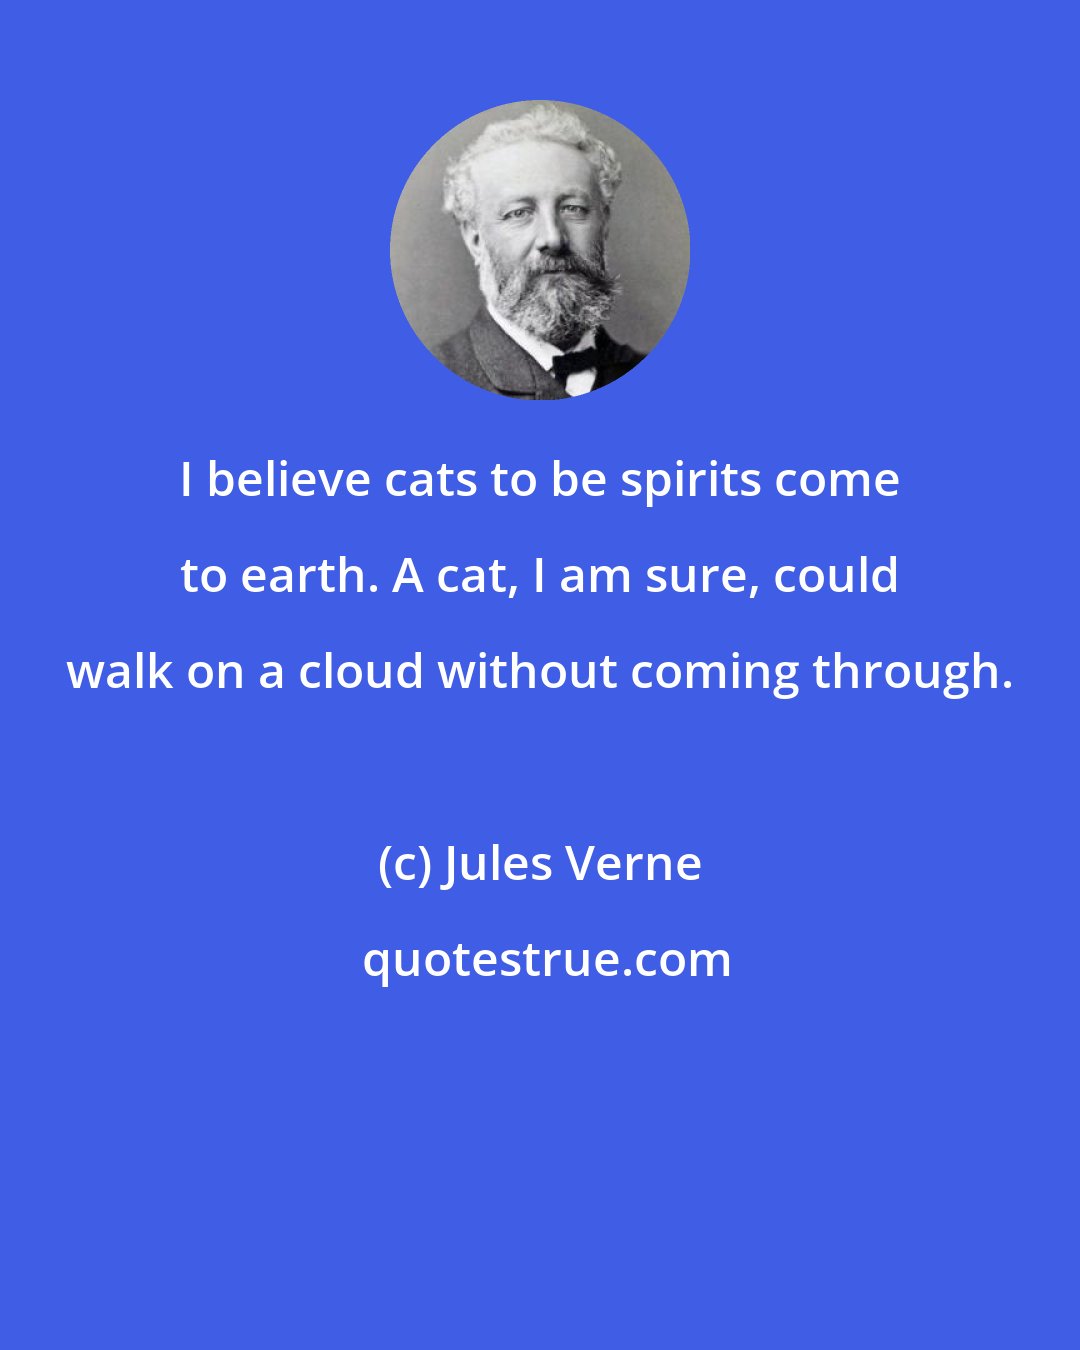 Jules Verne: I believe cats to be spirits come to earth. A cat, I am sure, could walk on a cloud without coming through.